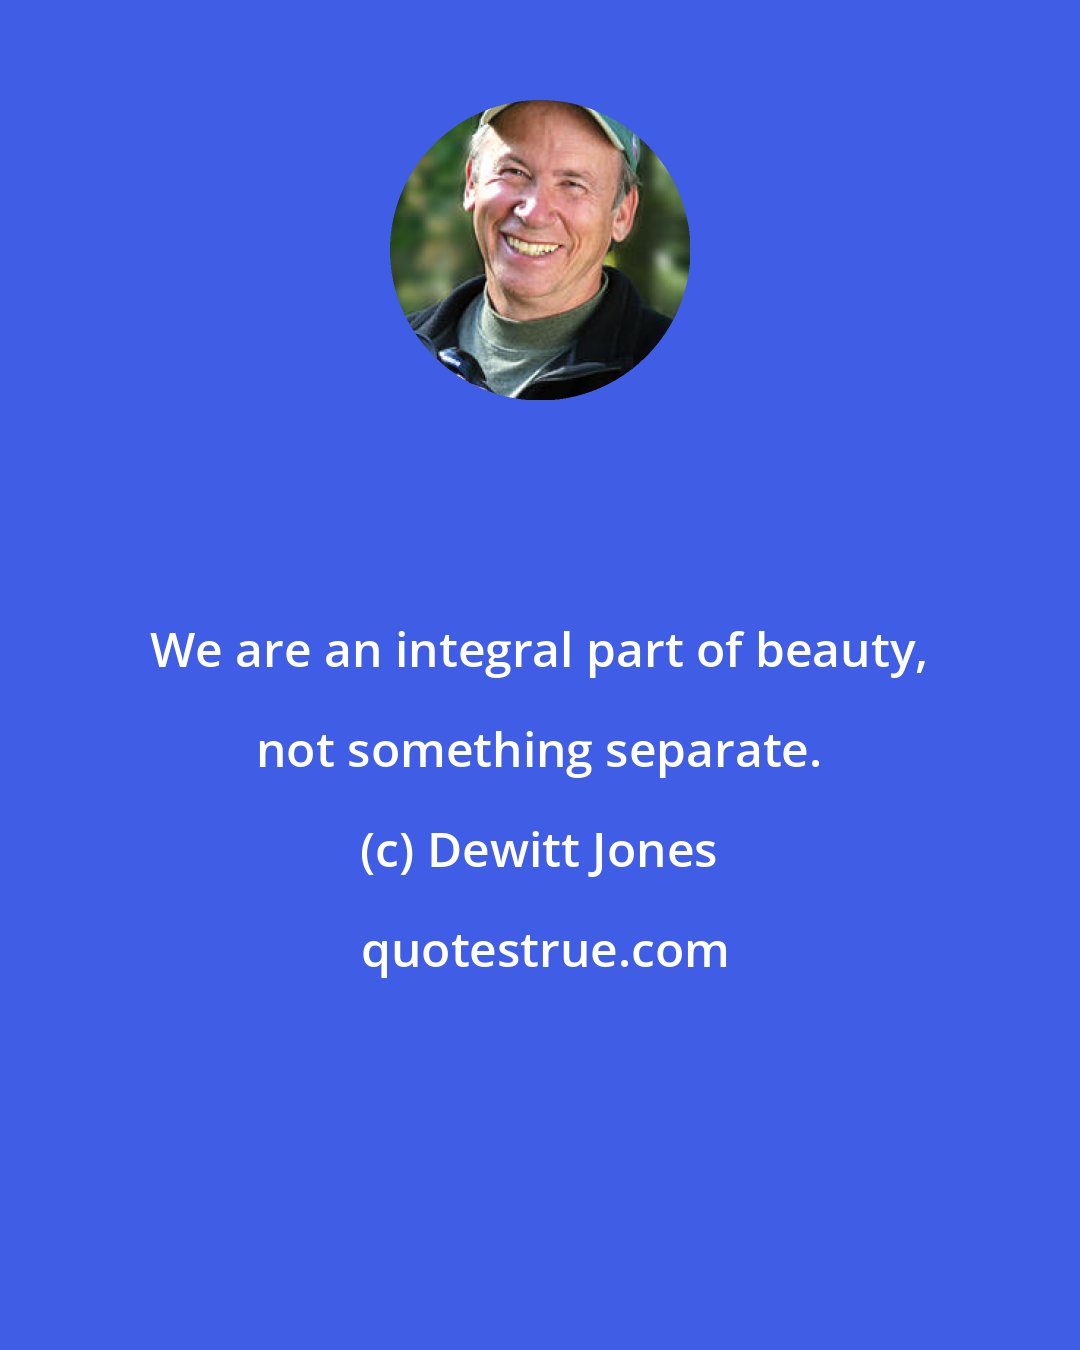 Dewitt Jones: We are an integral part of beauty, not something separate.